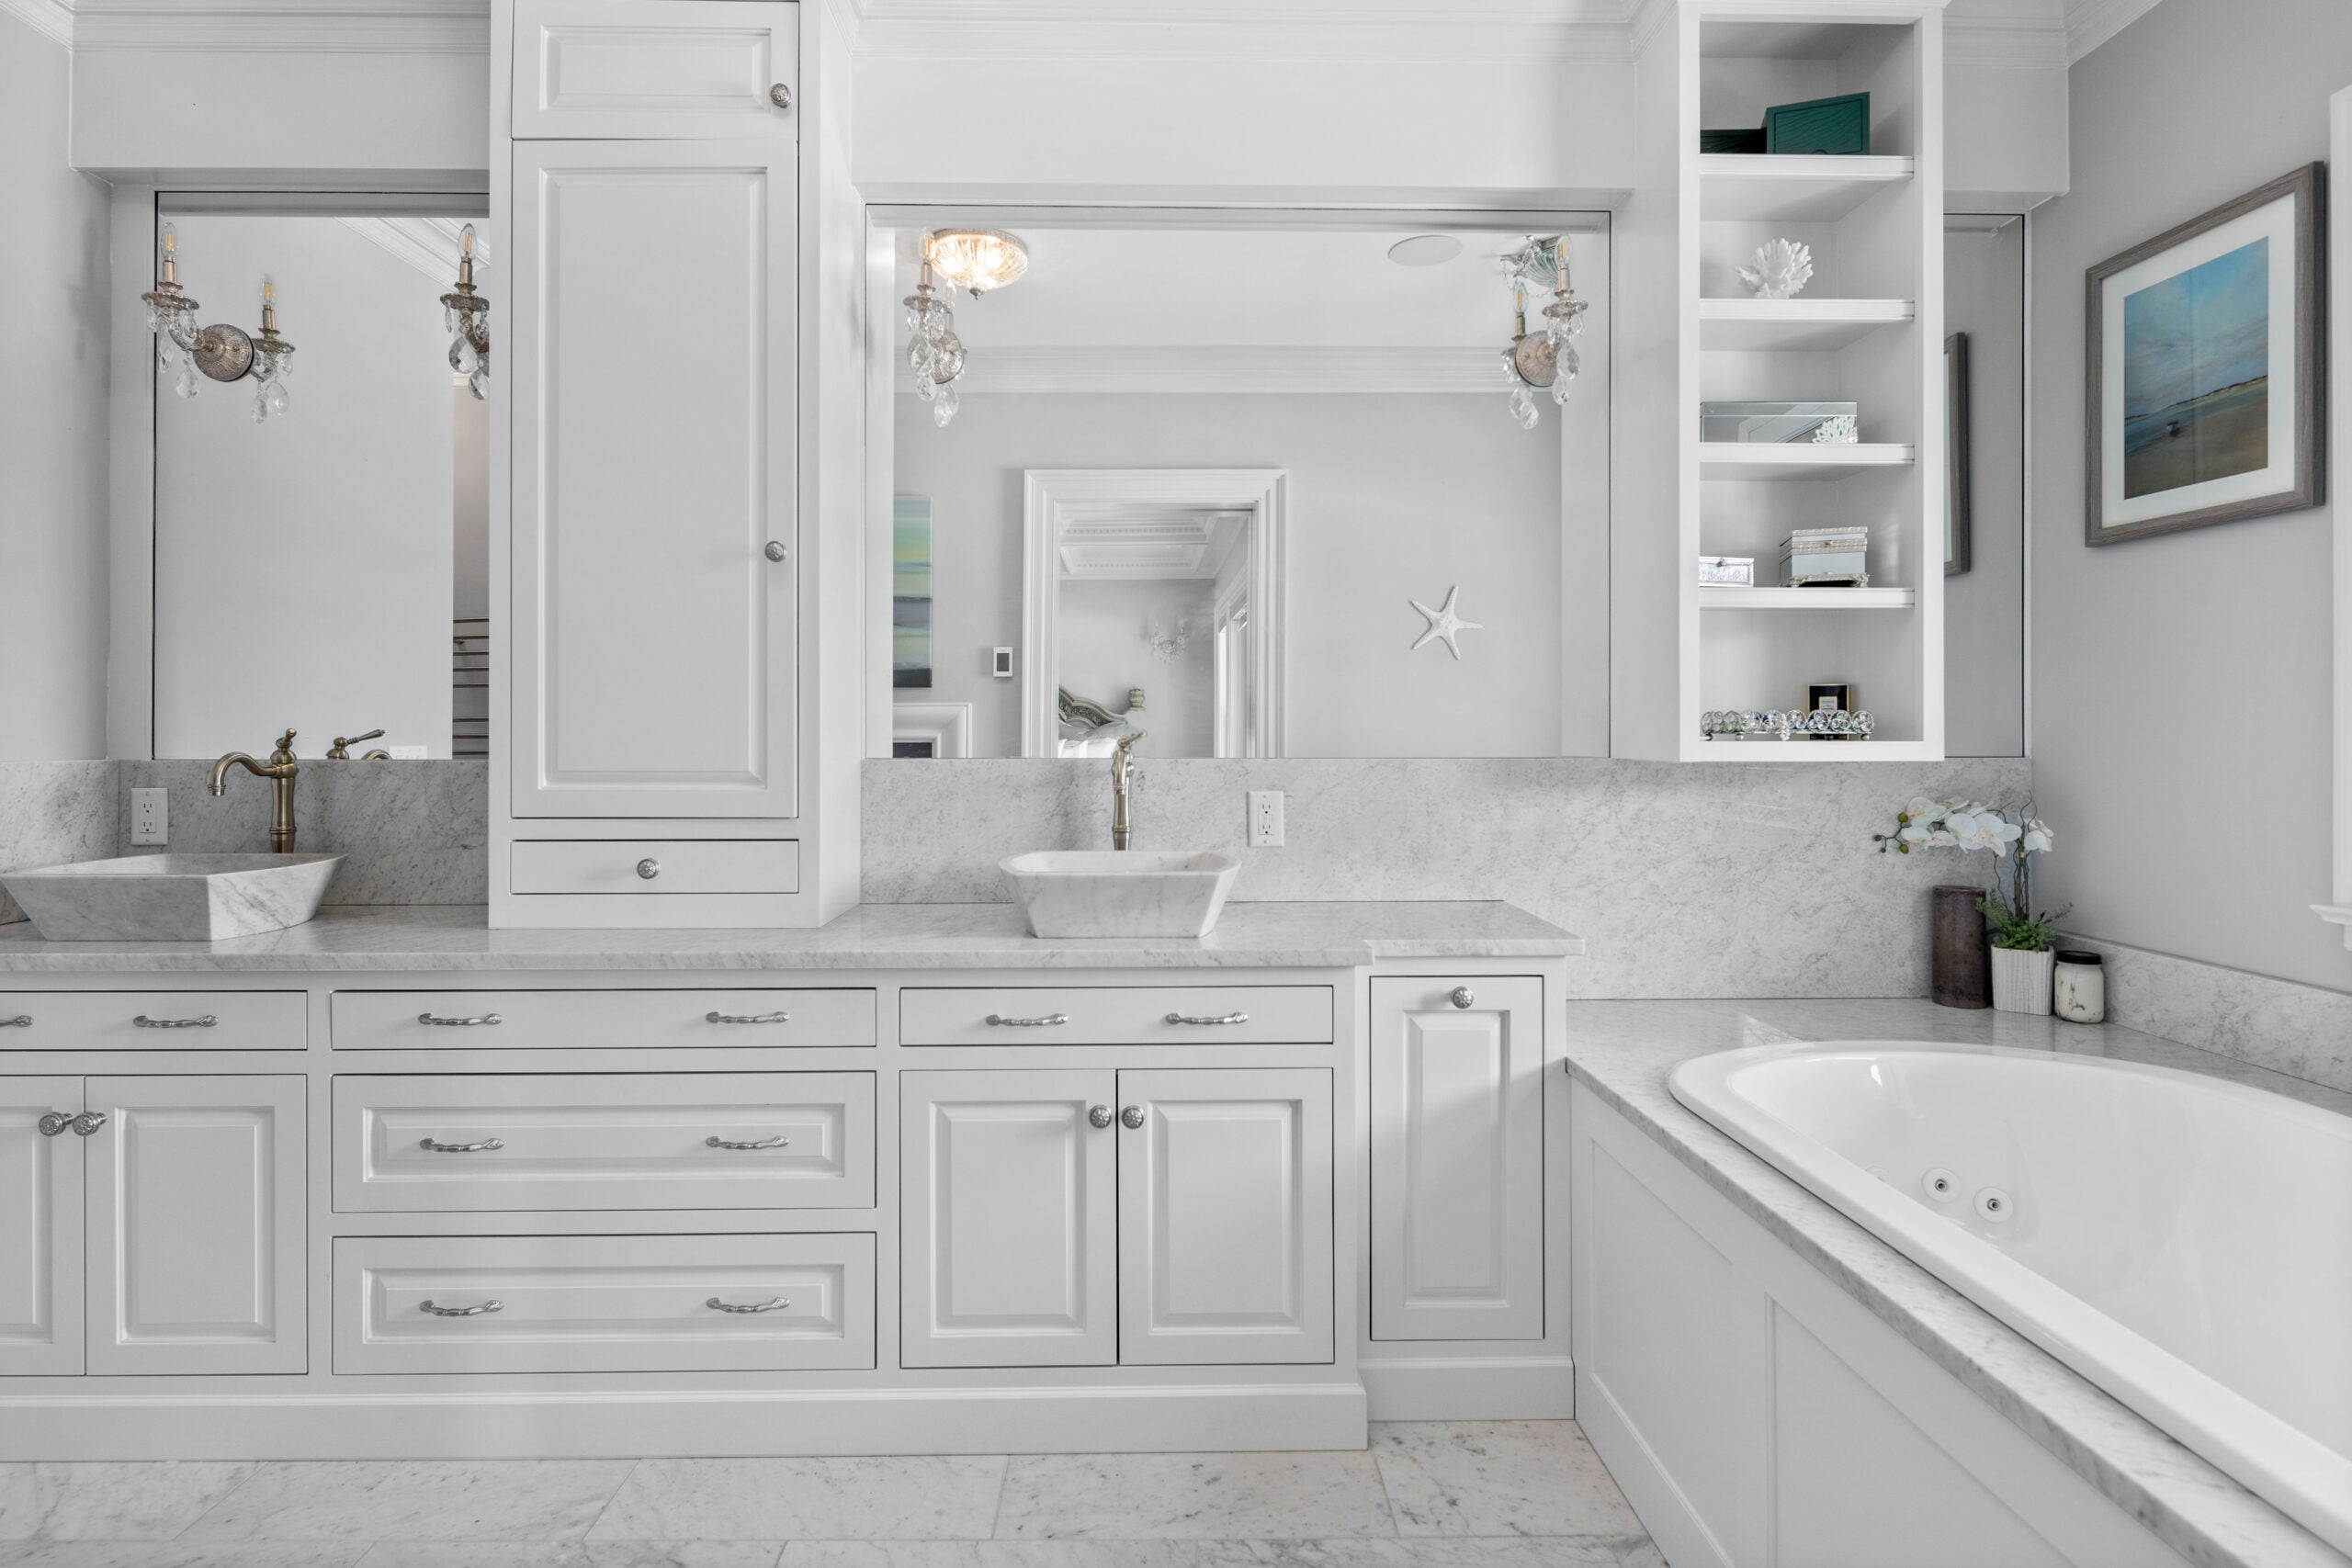 The primary bathroom has fresh white cabinets and walls, a double vanity, and soaking tub with ocean views.